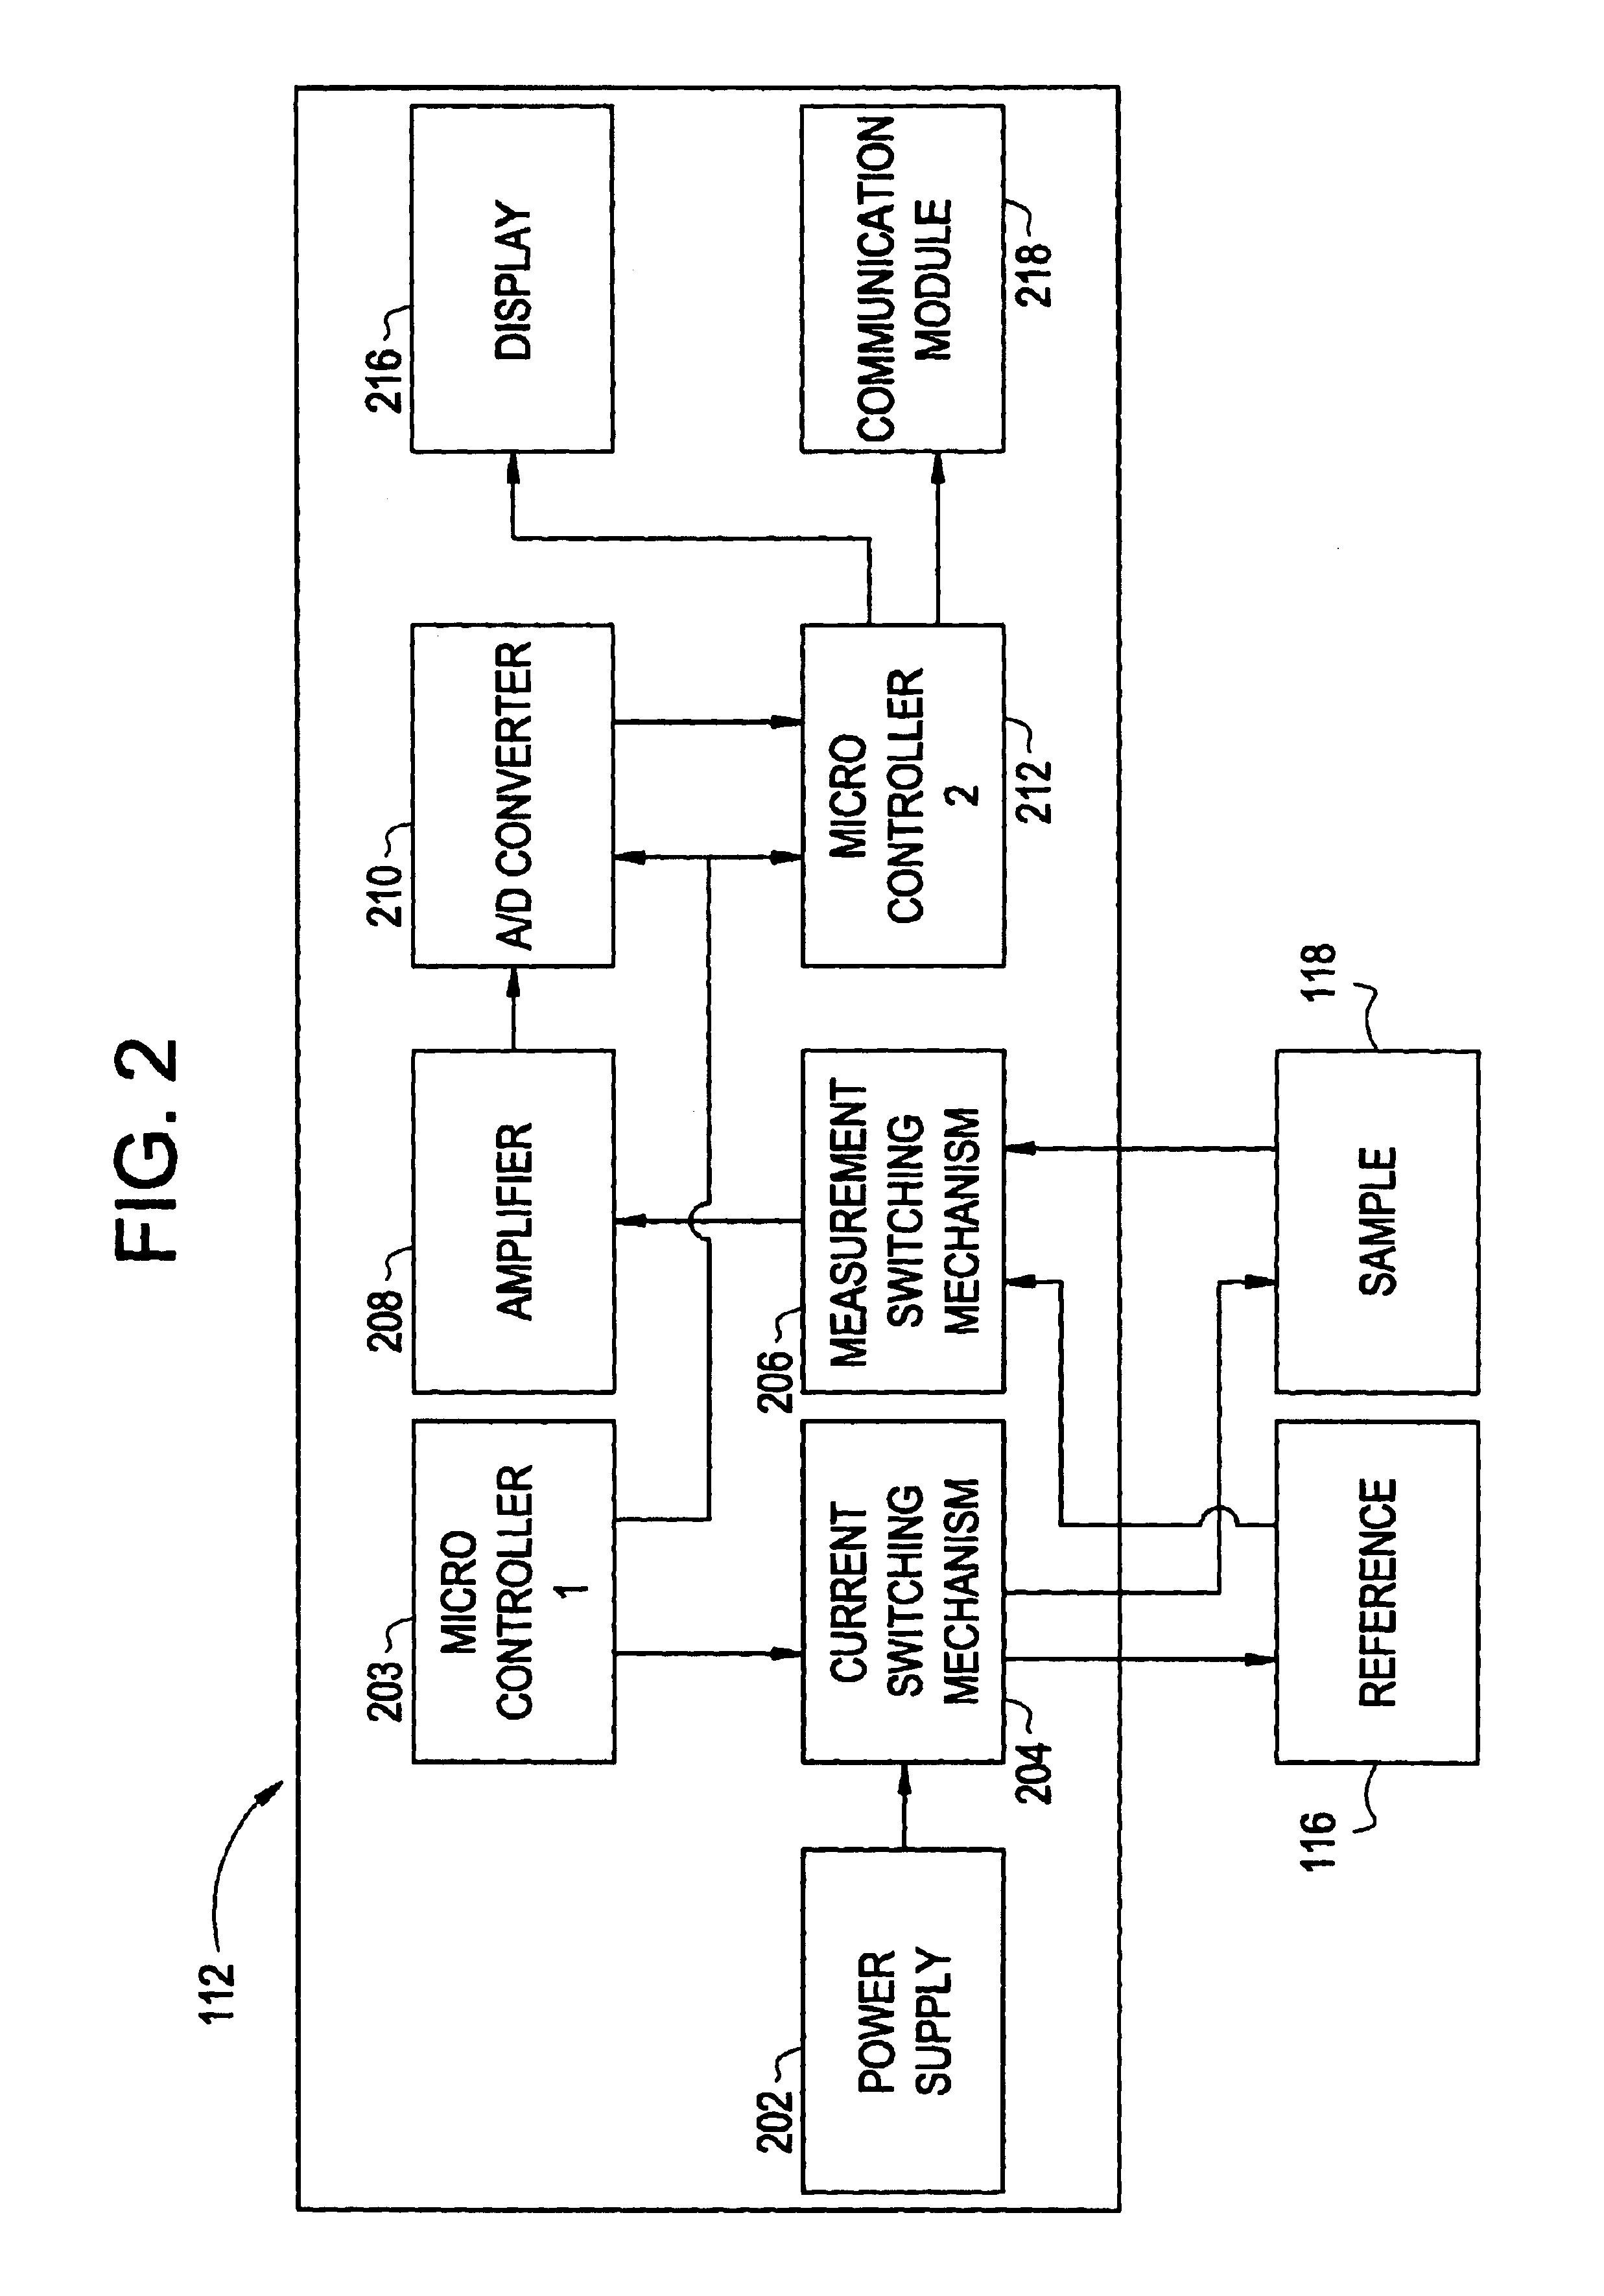 System and method for monitoring defects in structures